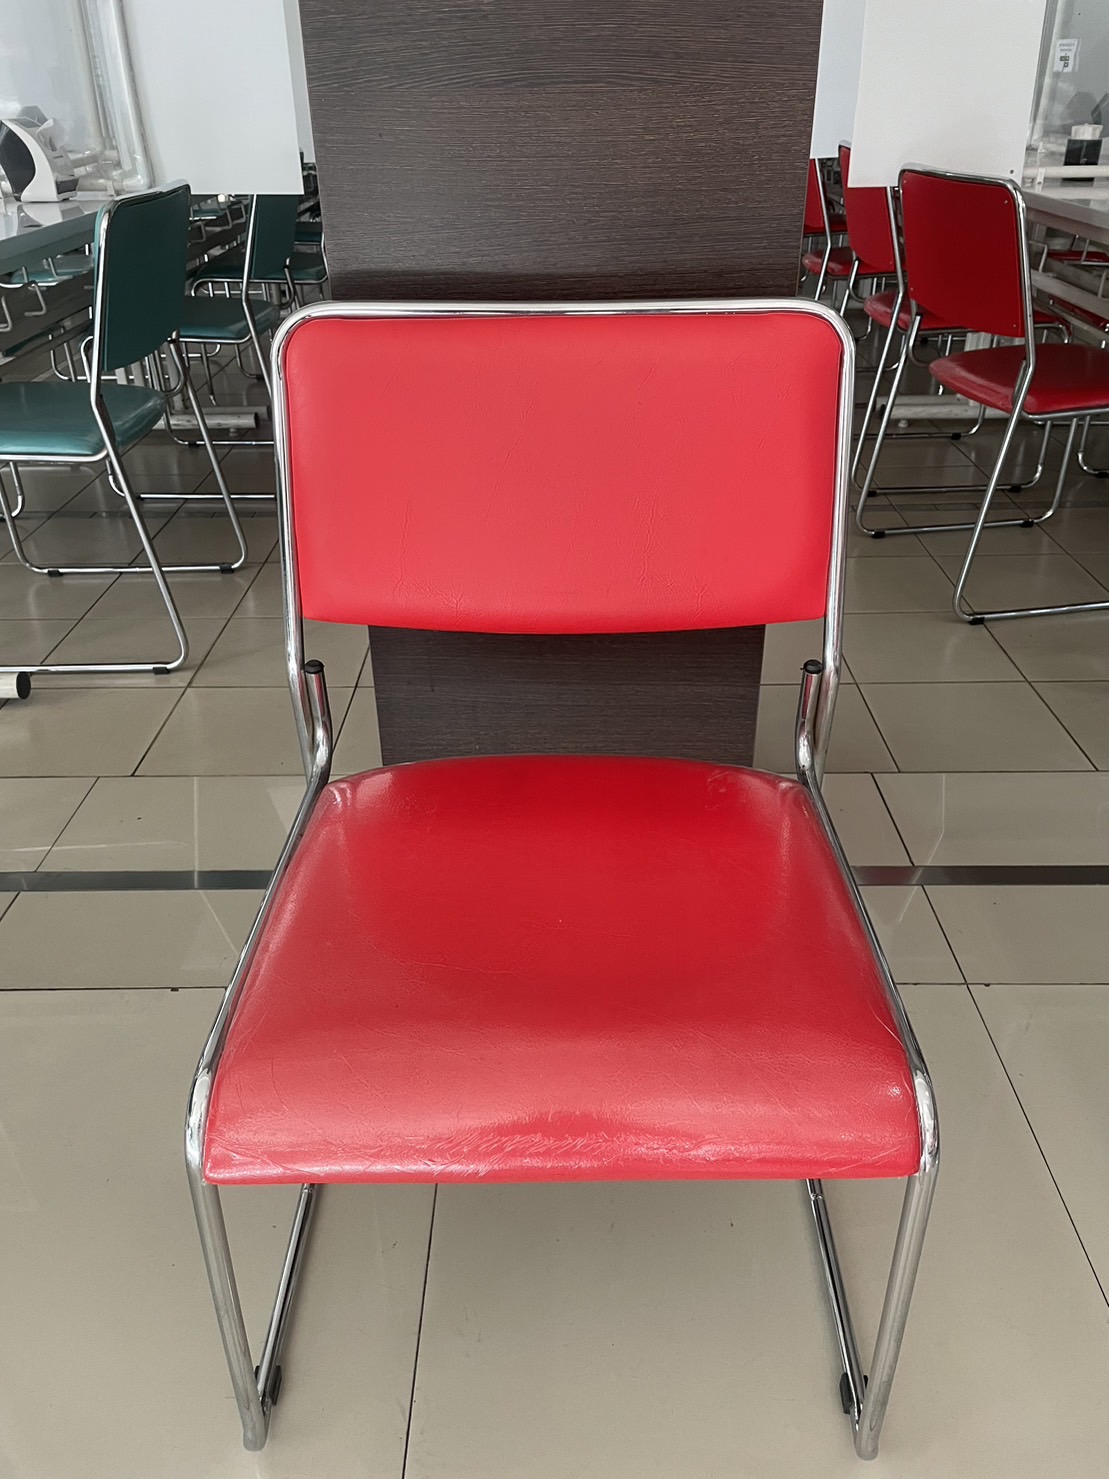 96086::VC-830::A VC modern chair with PVC leather/mesh fabric seat and chrome base. Dimension (WxDxH) cm : 46x53x78 